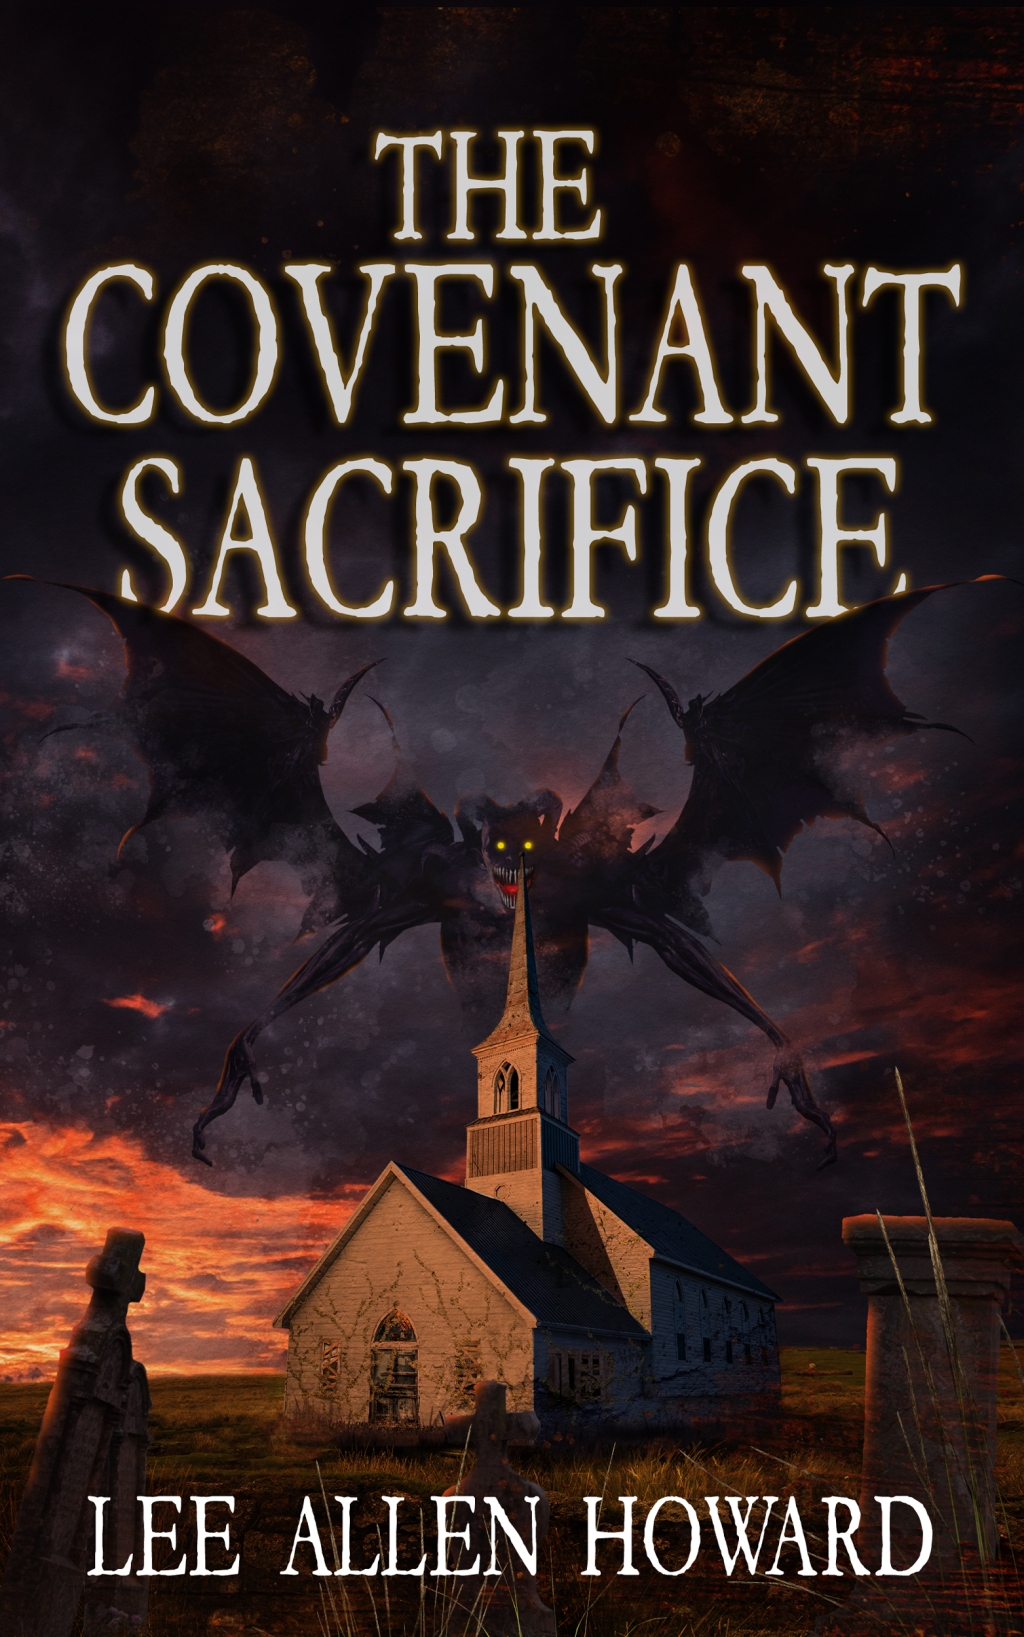 Interview with Lee Allen Howard, Author of The Covenant Sacrifice